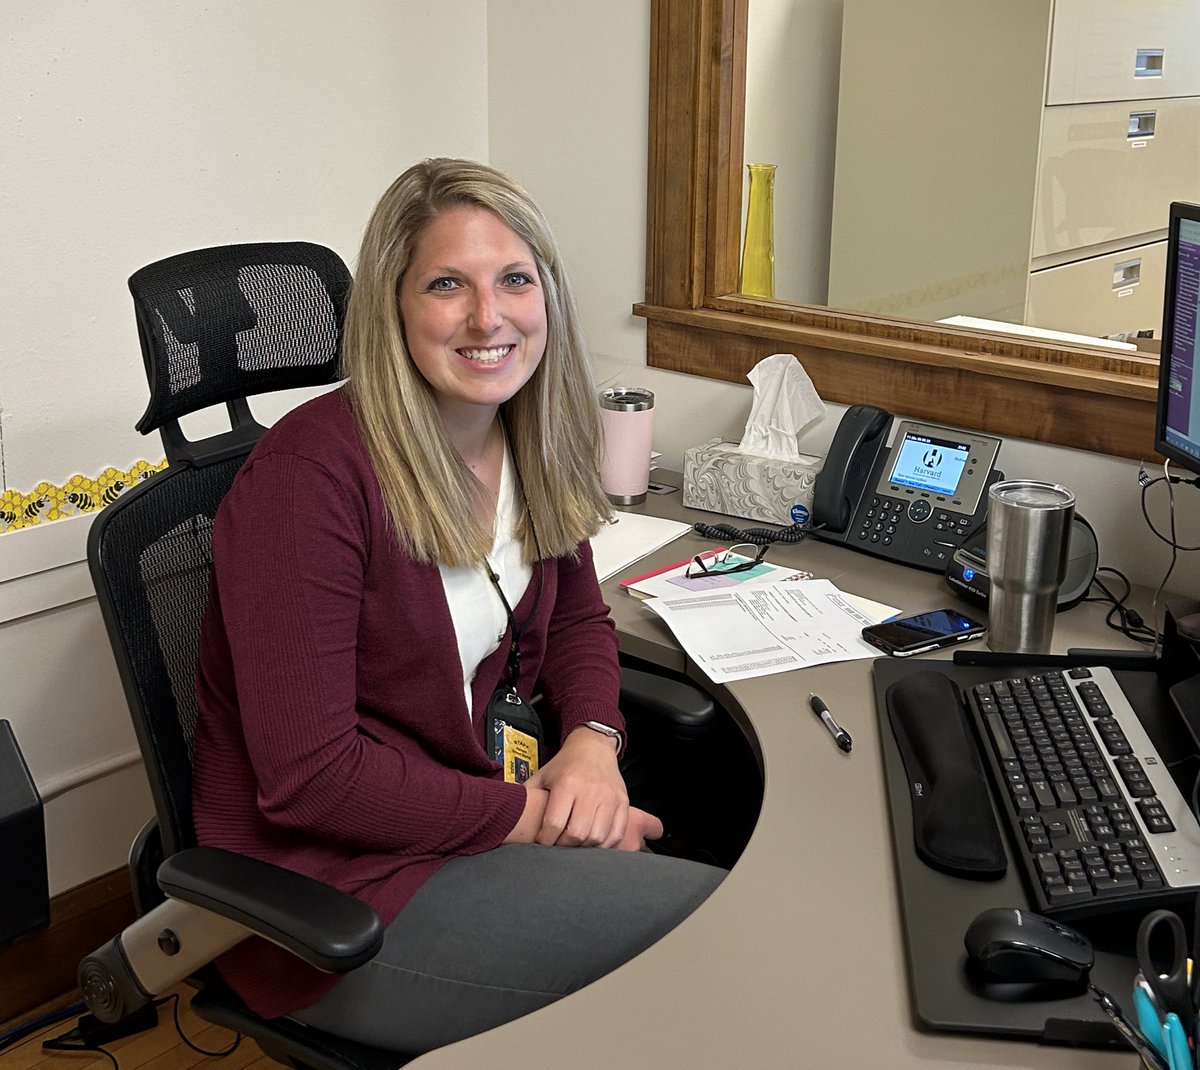 Please help me welcome Danielle Rudsinski to the Harvard CUSD 50 Business Office as our new Assistant Business Manager. She’s an amazing addition to #HarvardRising.   🐝